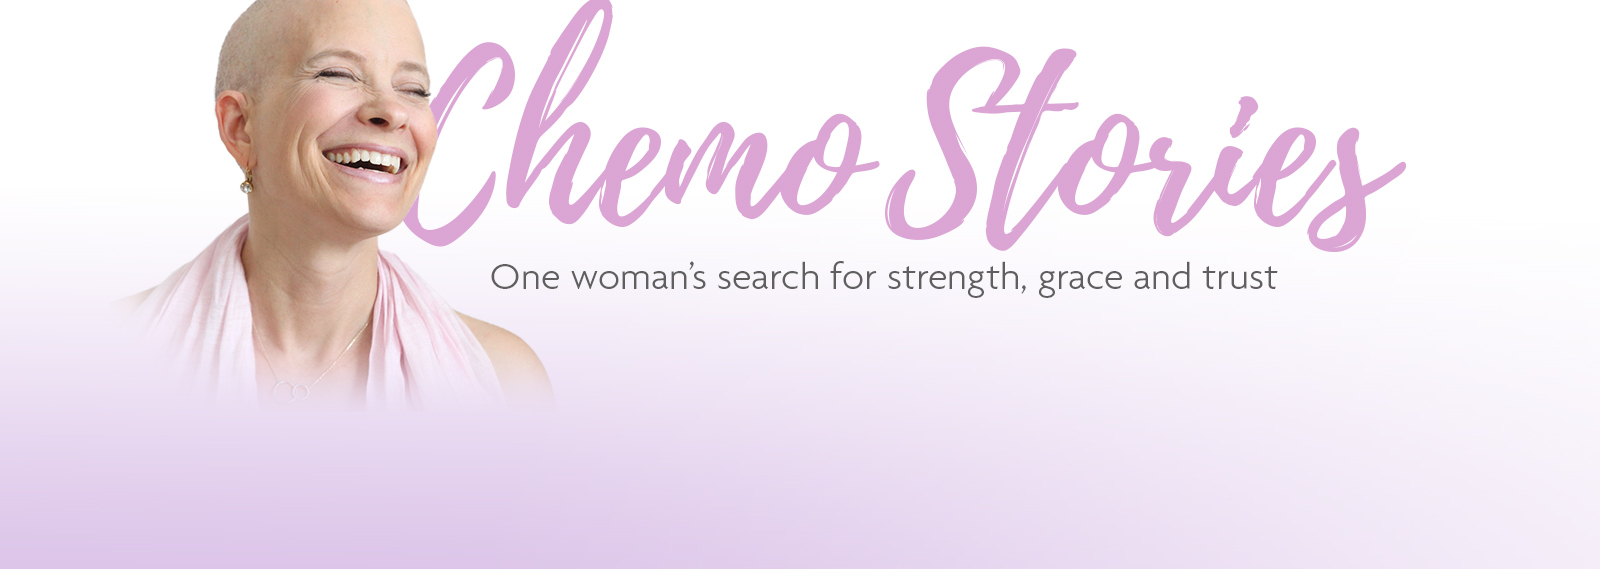 Chemo Stories : One woman’s search for strength, grace and trust